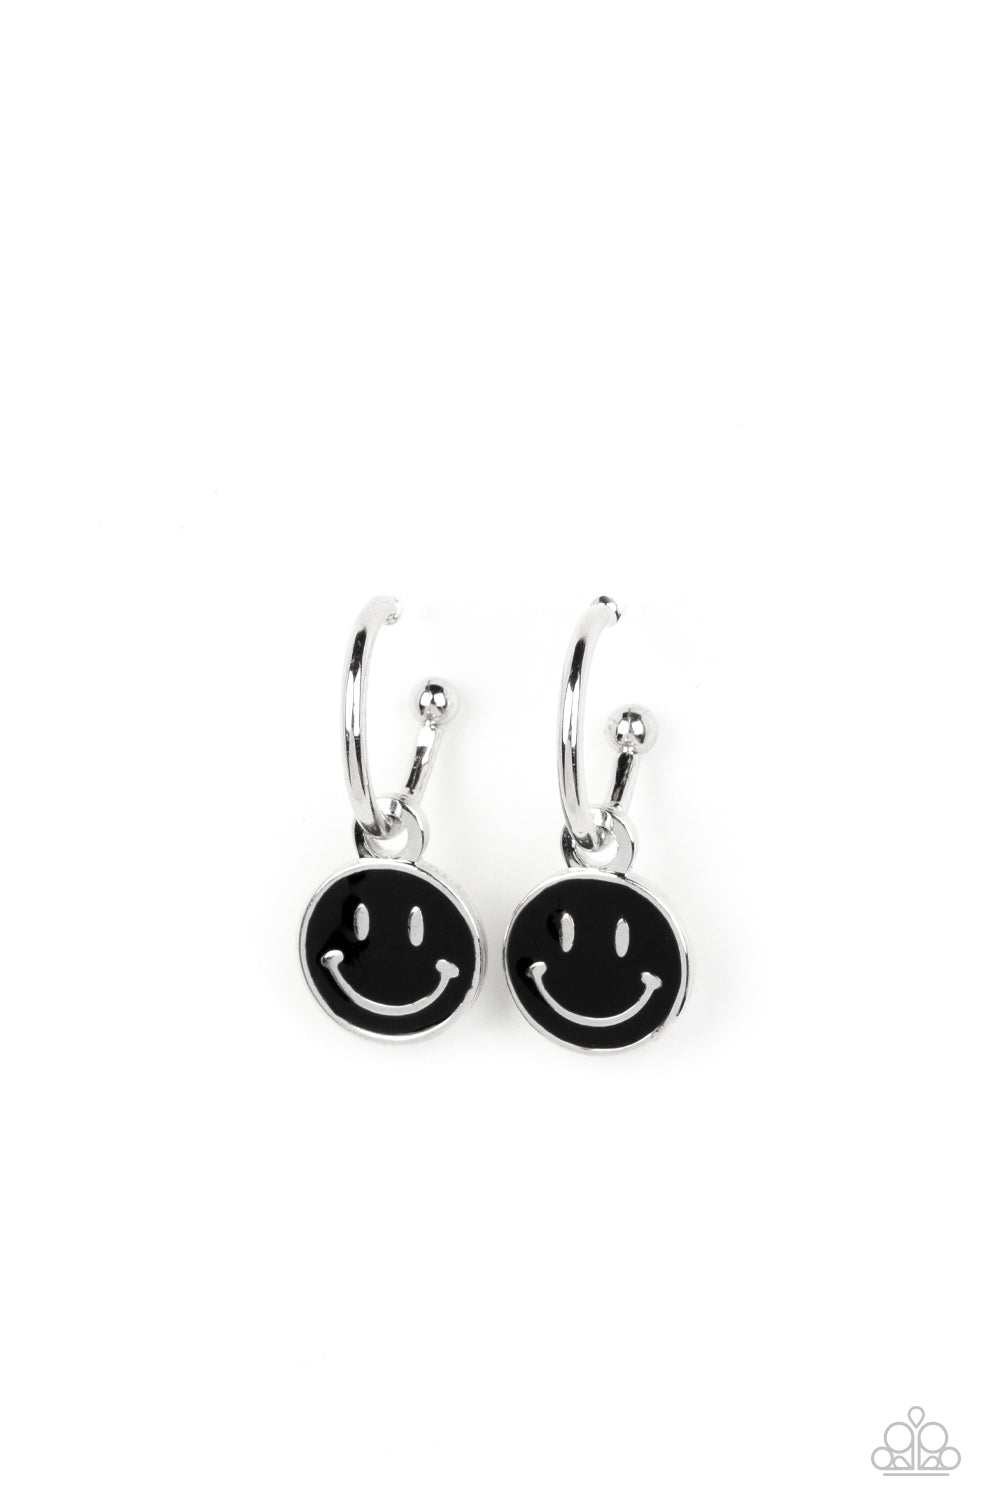 Subtle Smile Black Hoop Earring - Paparazzi Accessories  A small, skinny, silver hoop curves around the ear, where a silver ball is affixed to create the look of a barbell. A black disc slides along the hoop, cheerfully showcasing a silver smiley face that adorns its colorful surface. Earring attaches to a standard post fitting. Hoop measures approximately 1/2" in diameter.  Sold as one pair of hoop earrings.